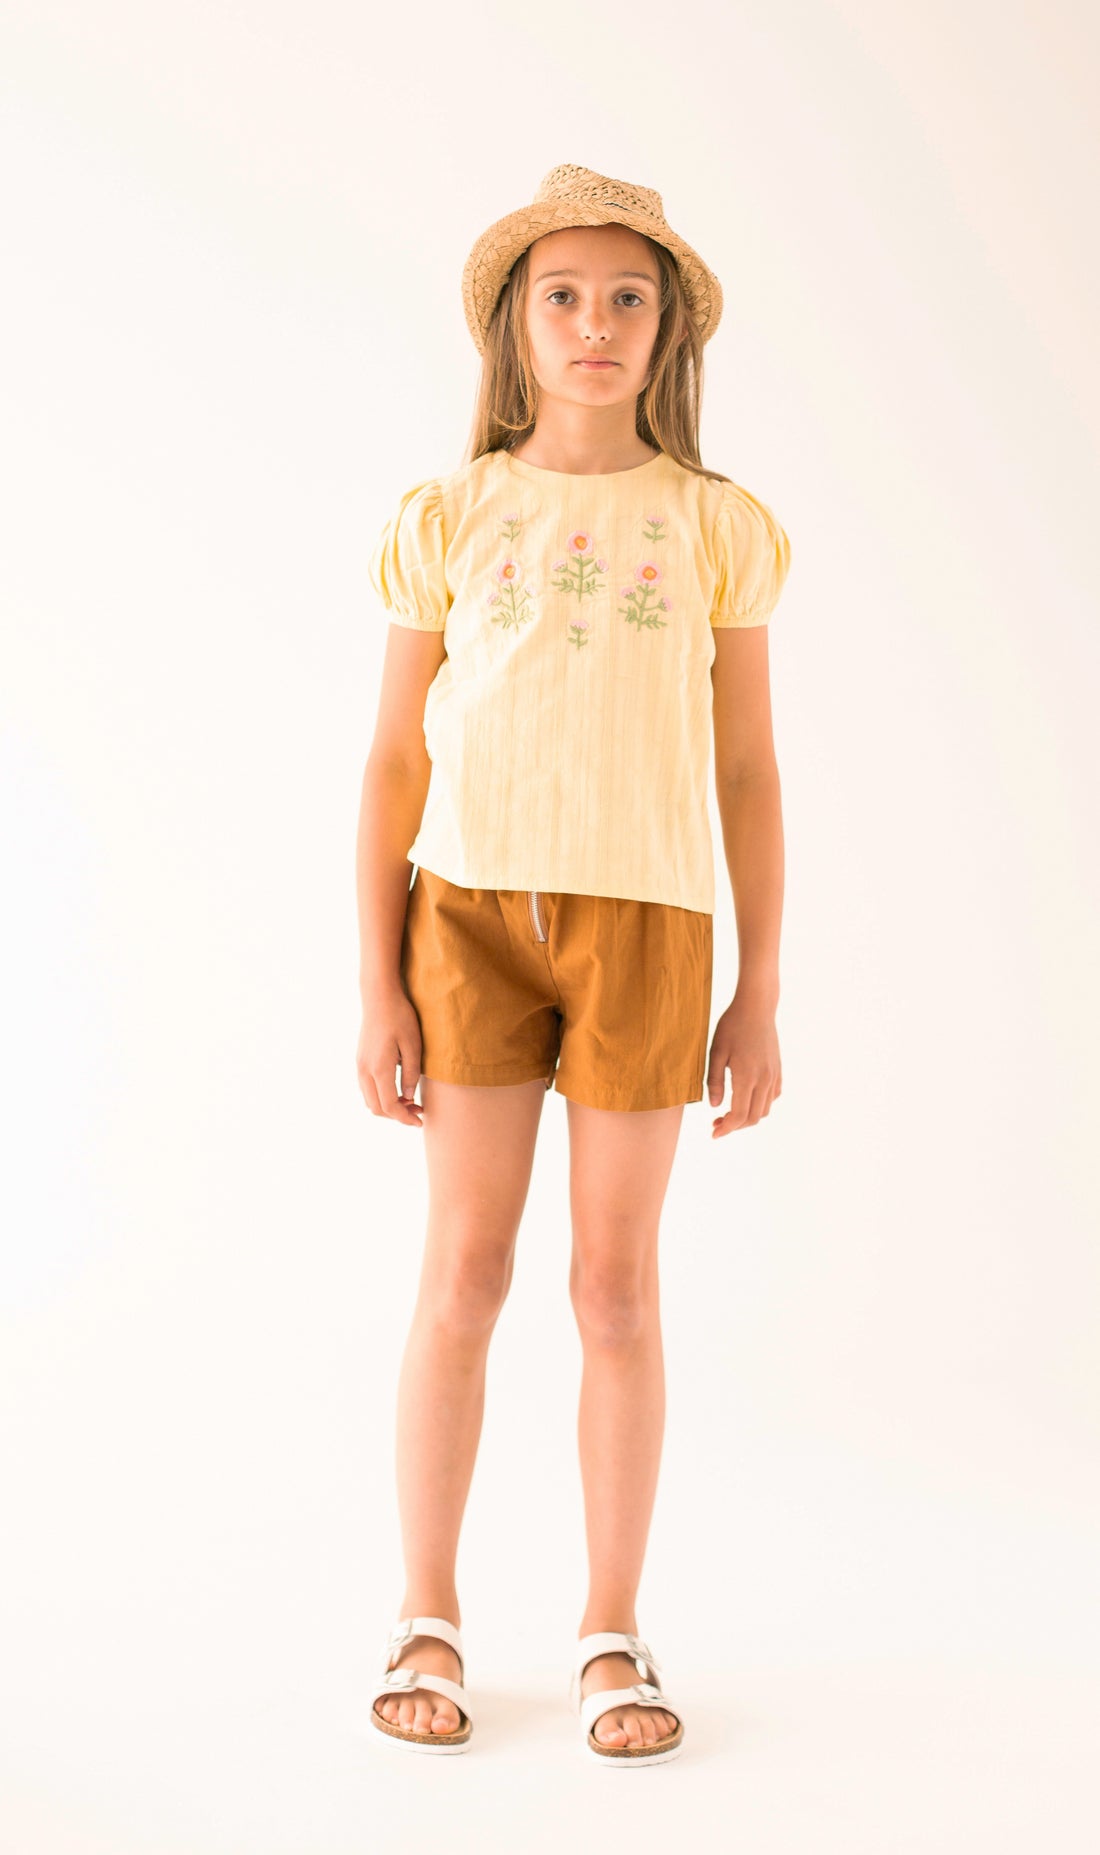 Wander & Wonder - embroidered blouse - buttercup